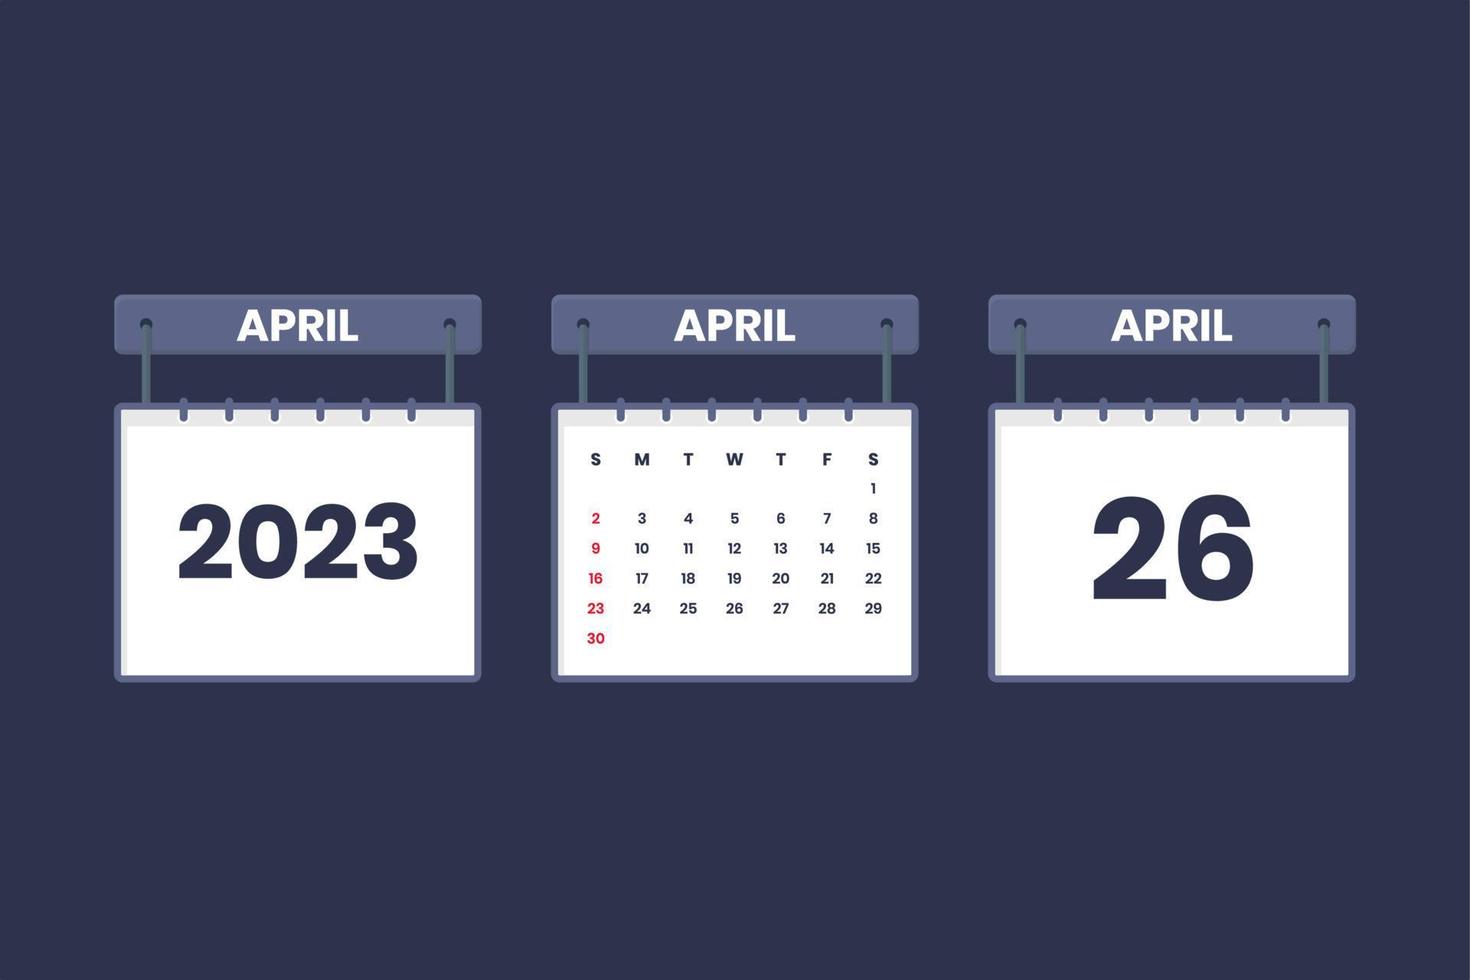 26 April 2023 calendar icon for schedule, appointment, important date concept vector